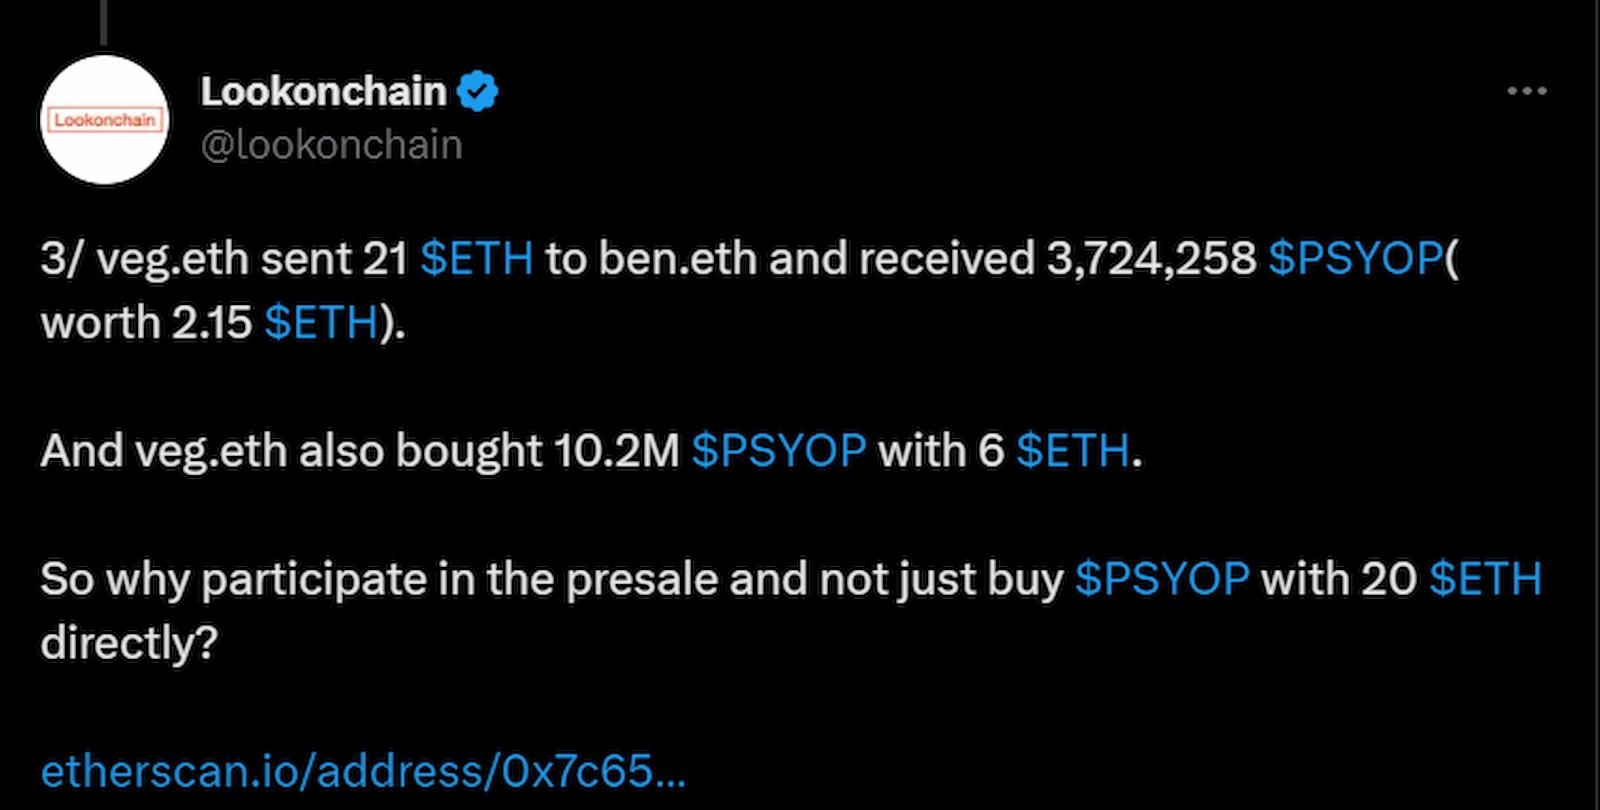 Lookonchain highlighted the losses that PSYOP pre-sale investors suffered